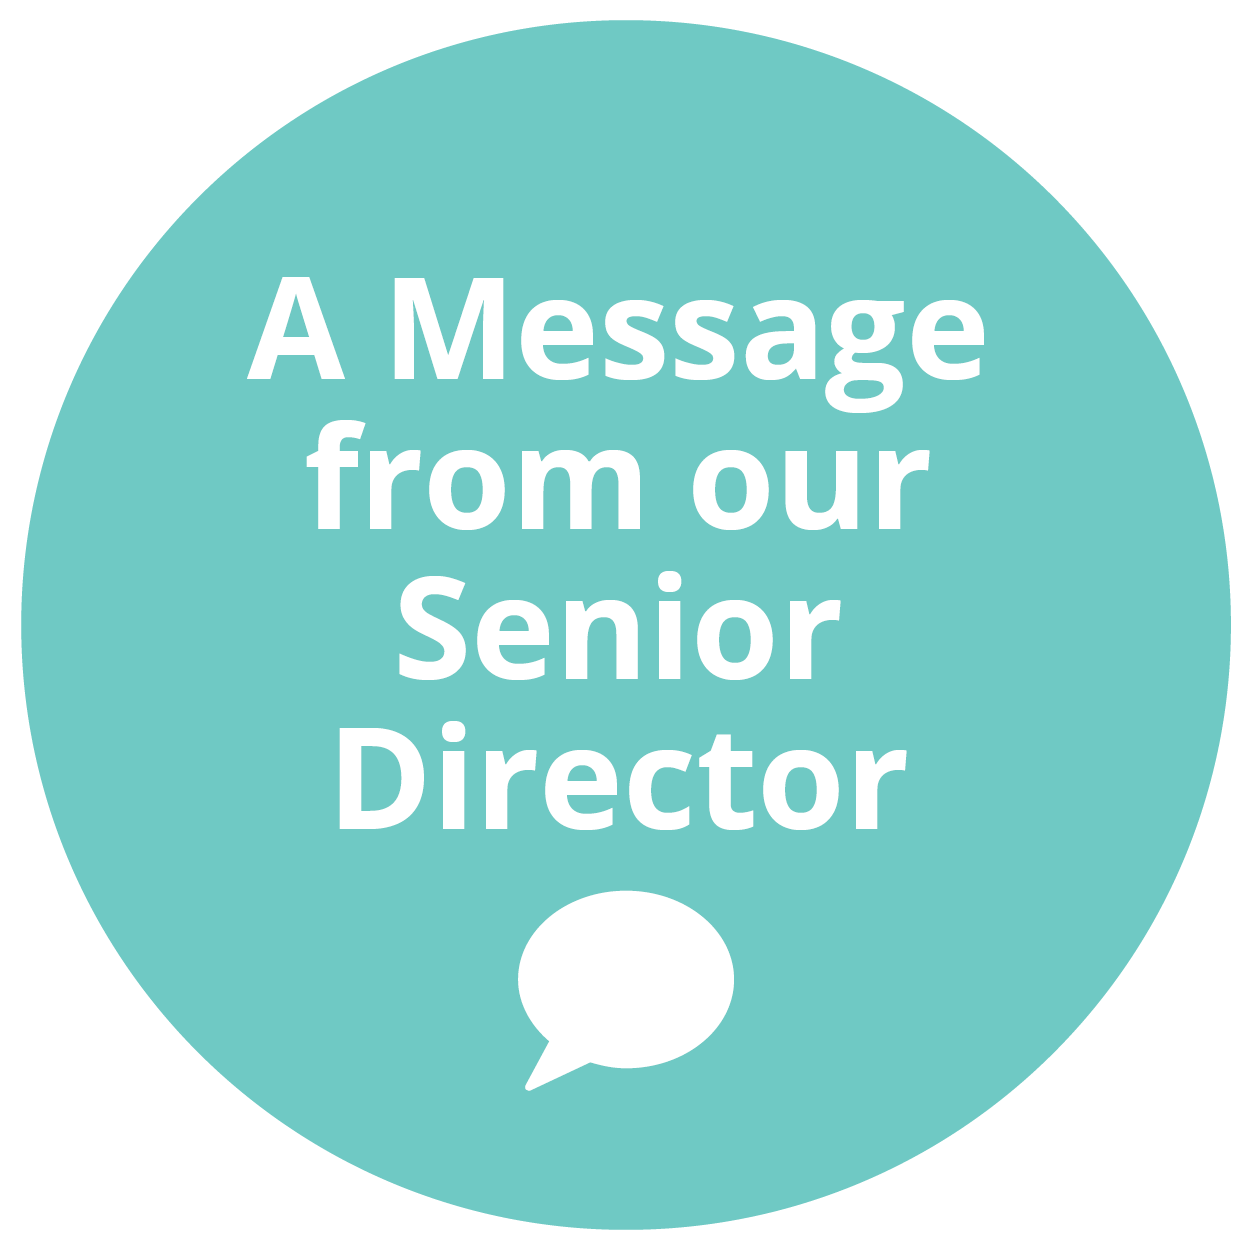 A Message from the Senior Director